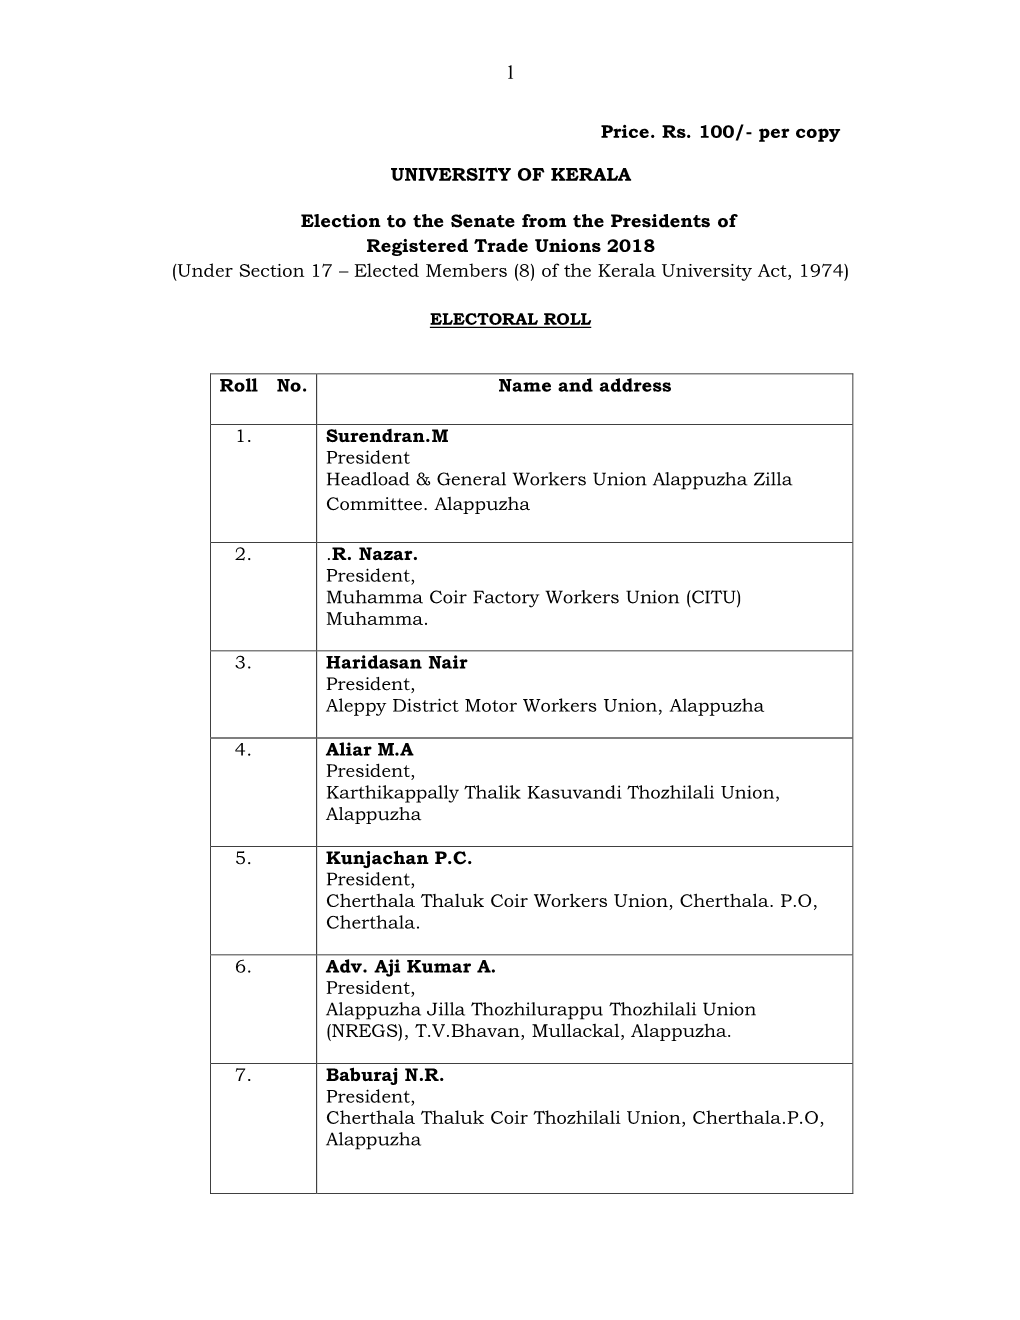 Trade Unions 2018 (Under Section 17 – Elected Members (8) of the Kerala University Act, 1974)